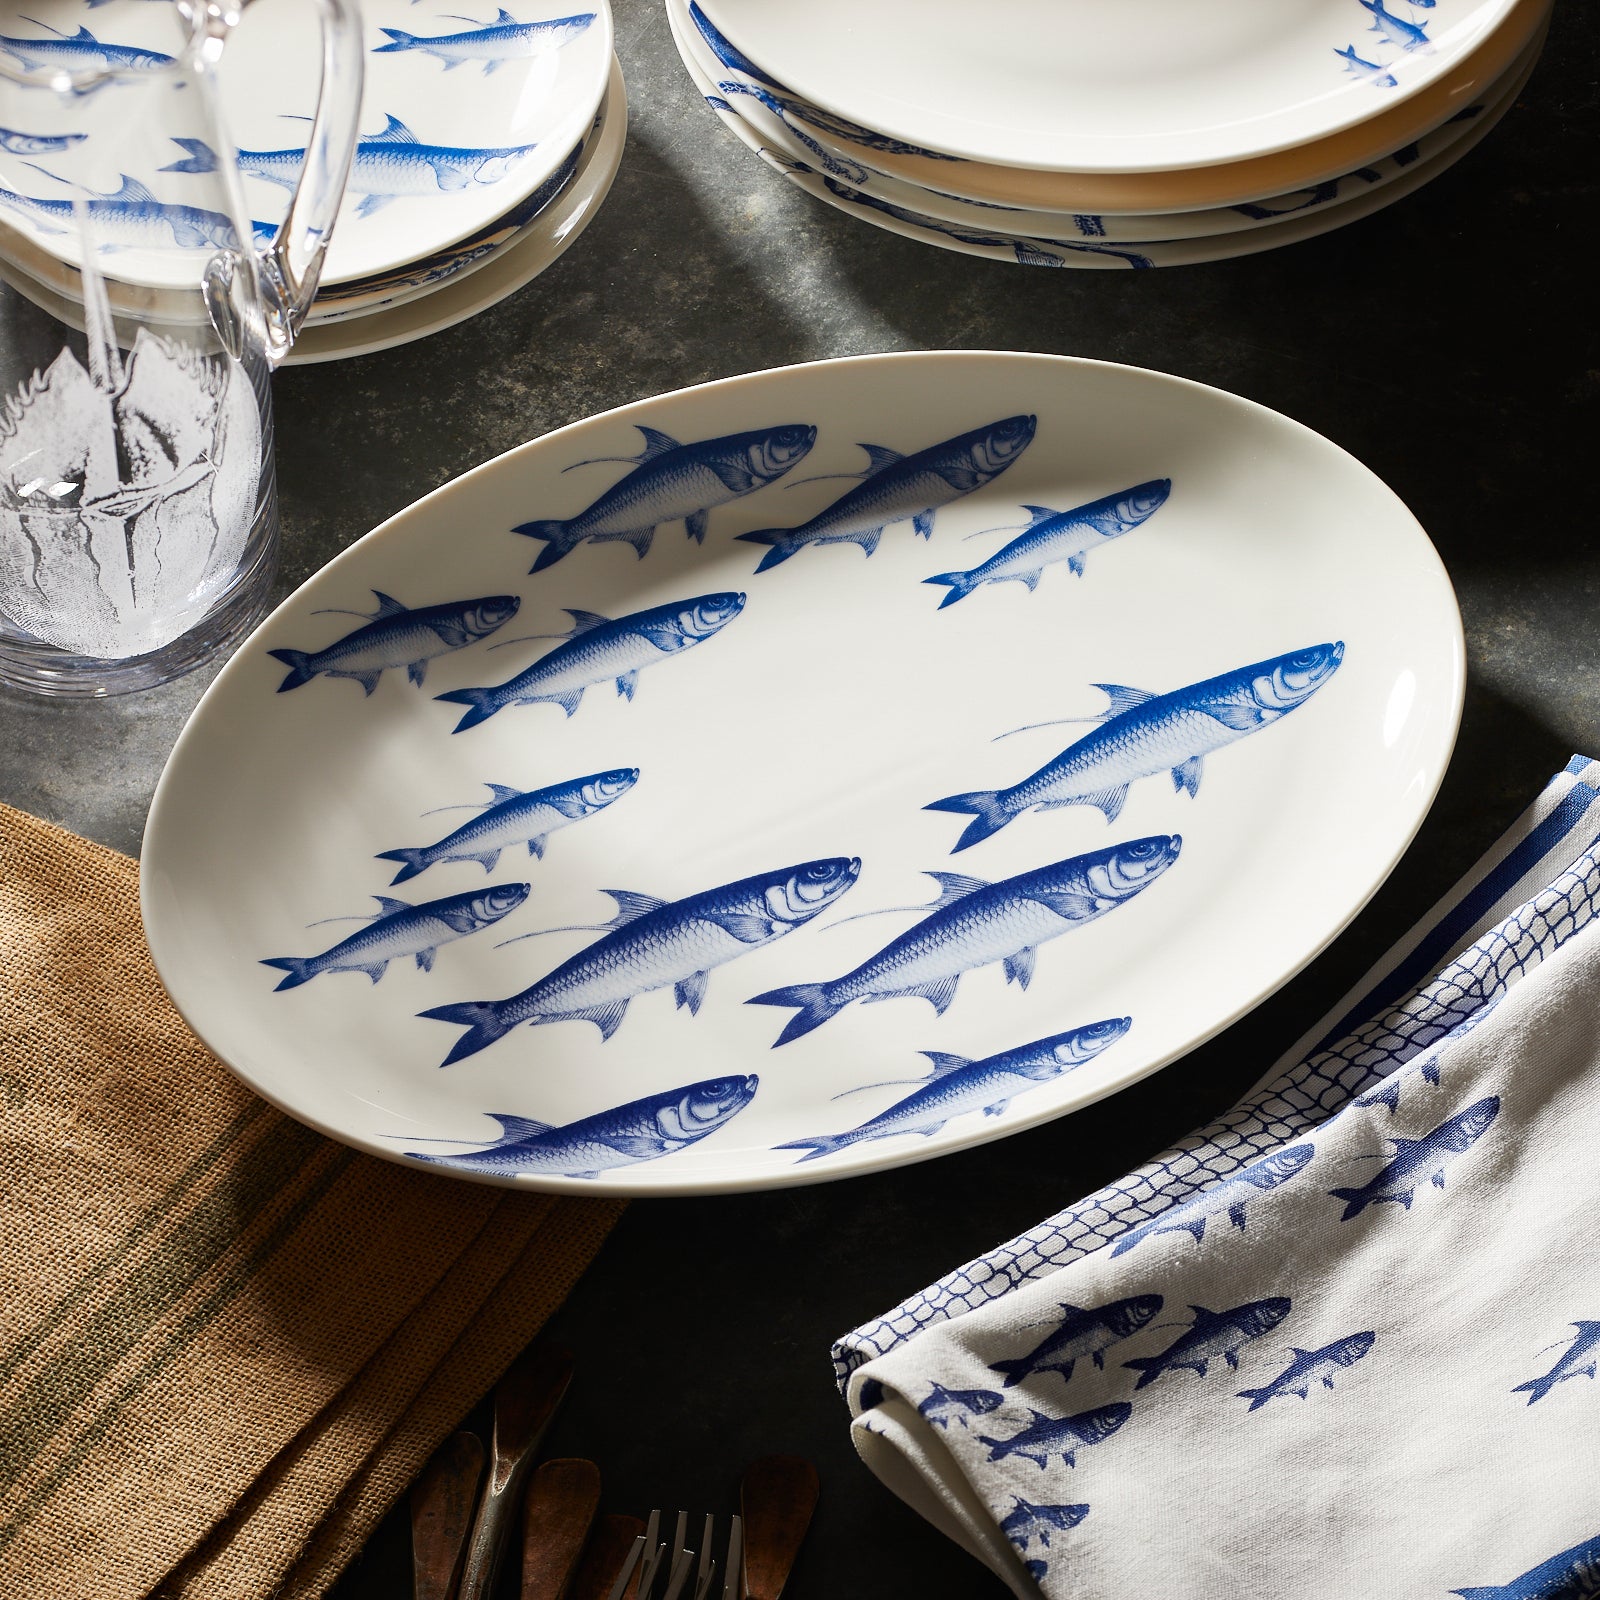 A Caskata Lake House Bundle featuring plates and bowls adorned with blue fish designs, perfect for enhancing your lake house decor, paired with a checked blue and white napkin.